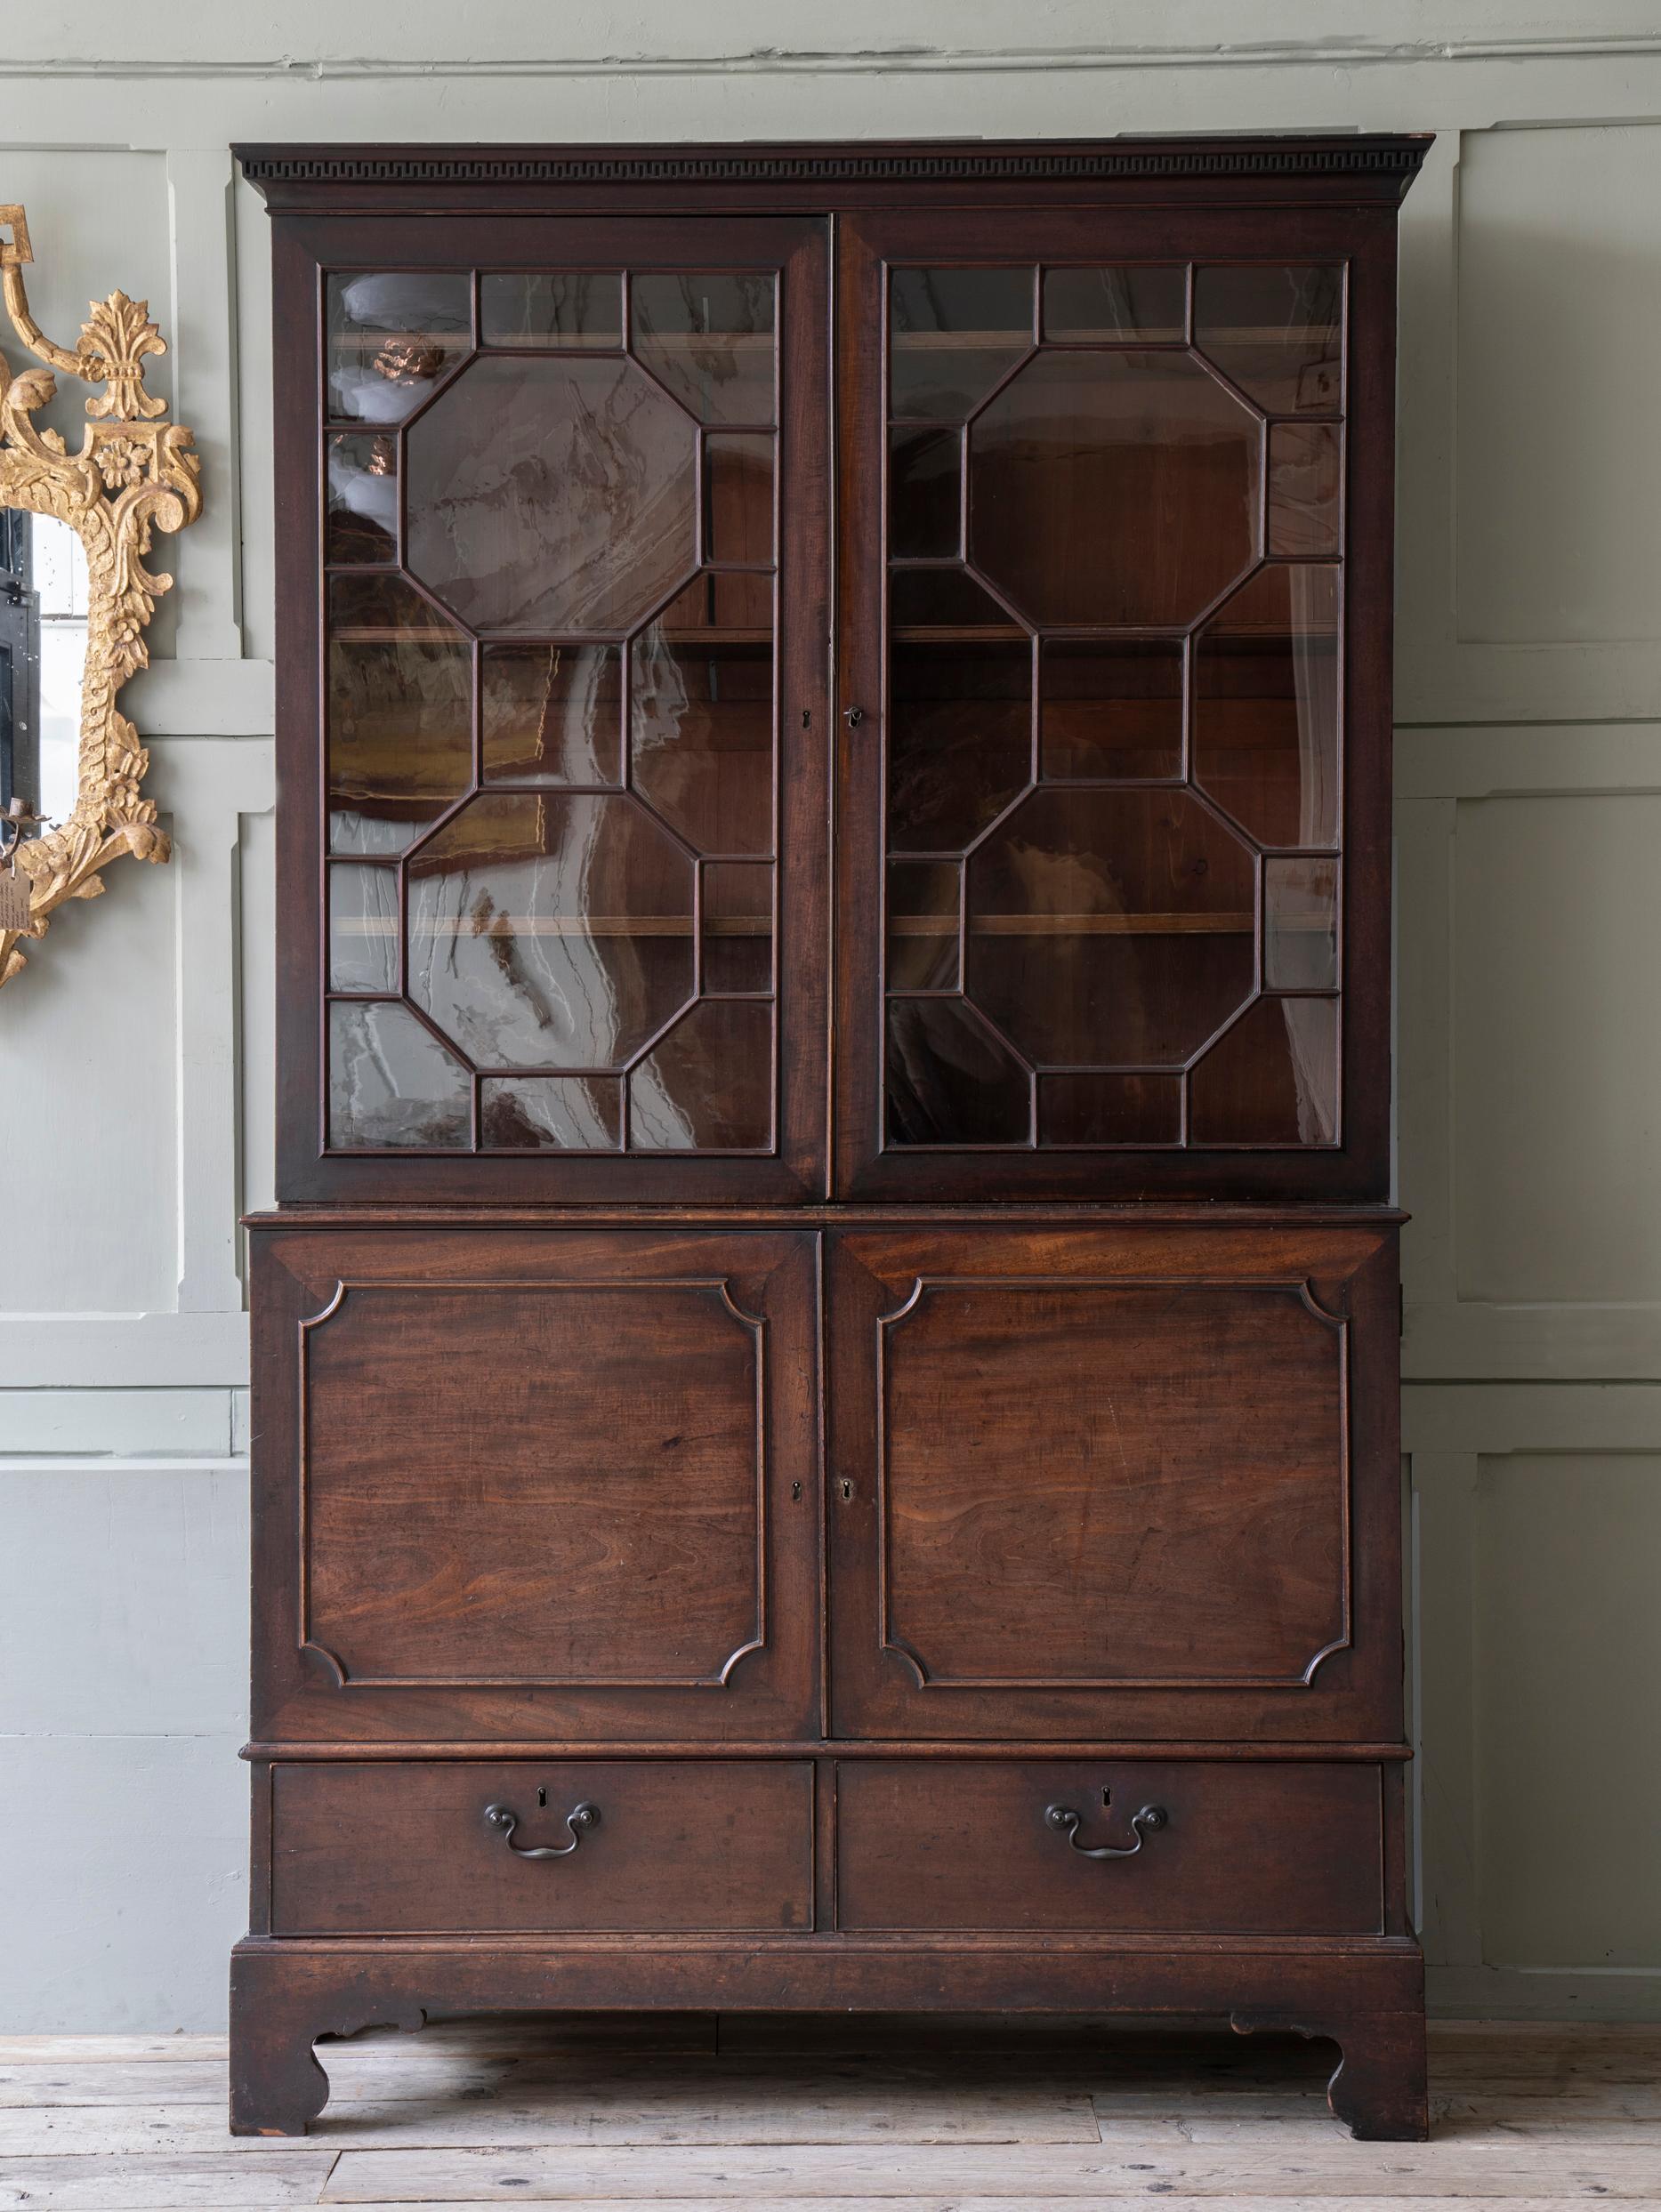 The cupboard base with lower, drawers raised on bracket feet, the astragal glazed double doors having adjustable shelves behind.

An astoundingly original piece, the surface retaining its original oil wax finish.

All of the mouth blown glass